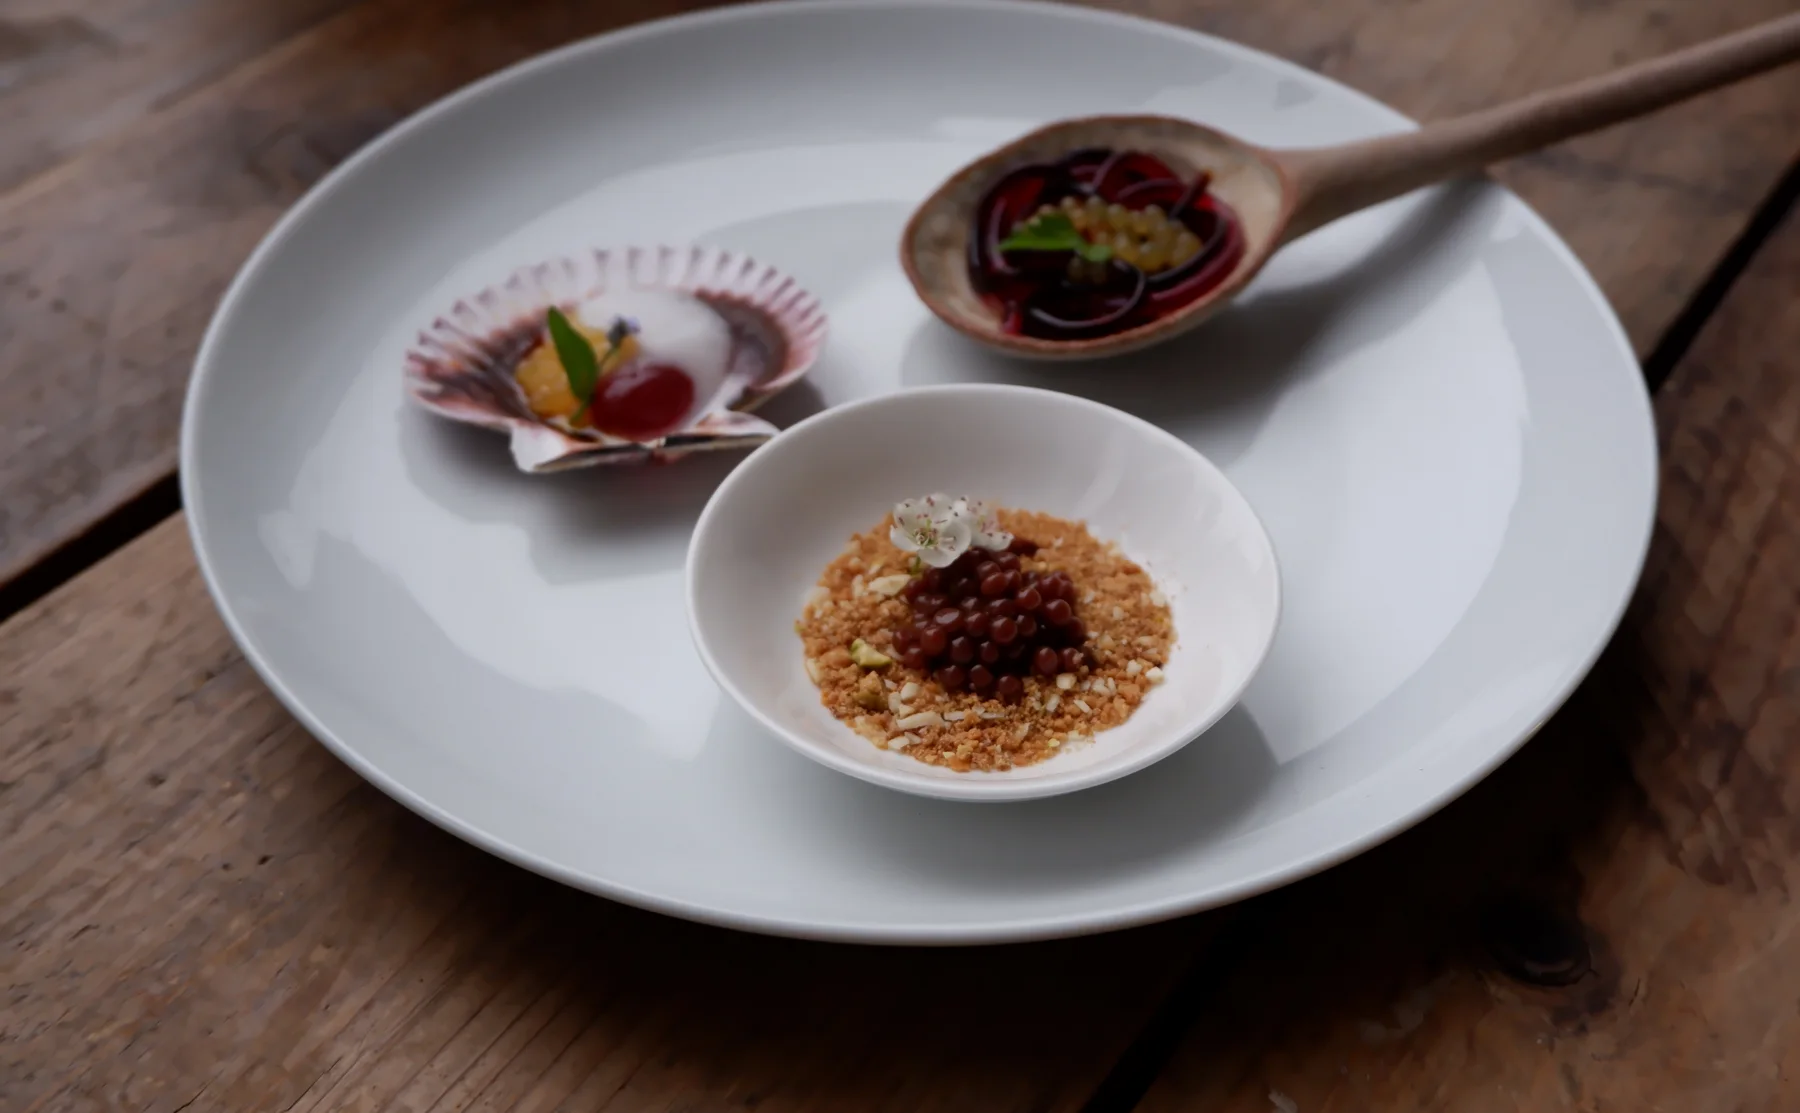 Molecular gastronomy cooking techniques and dinner in London - 1383996